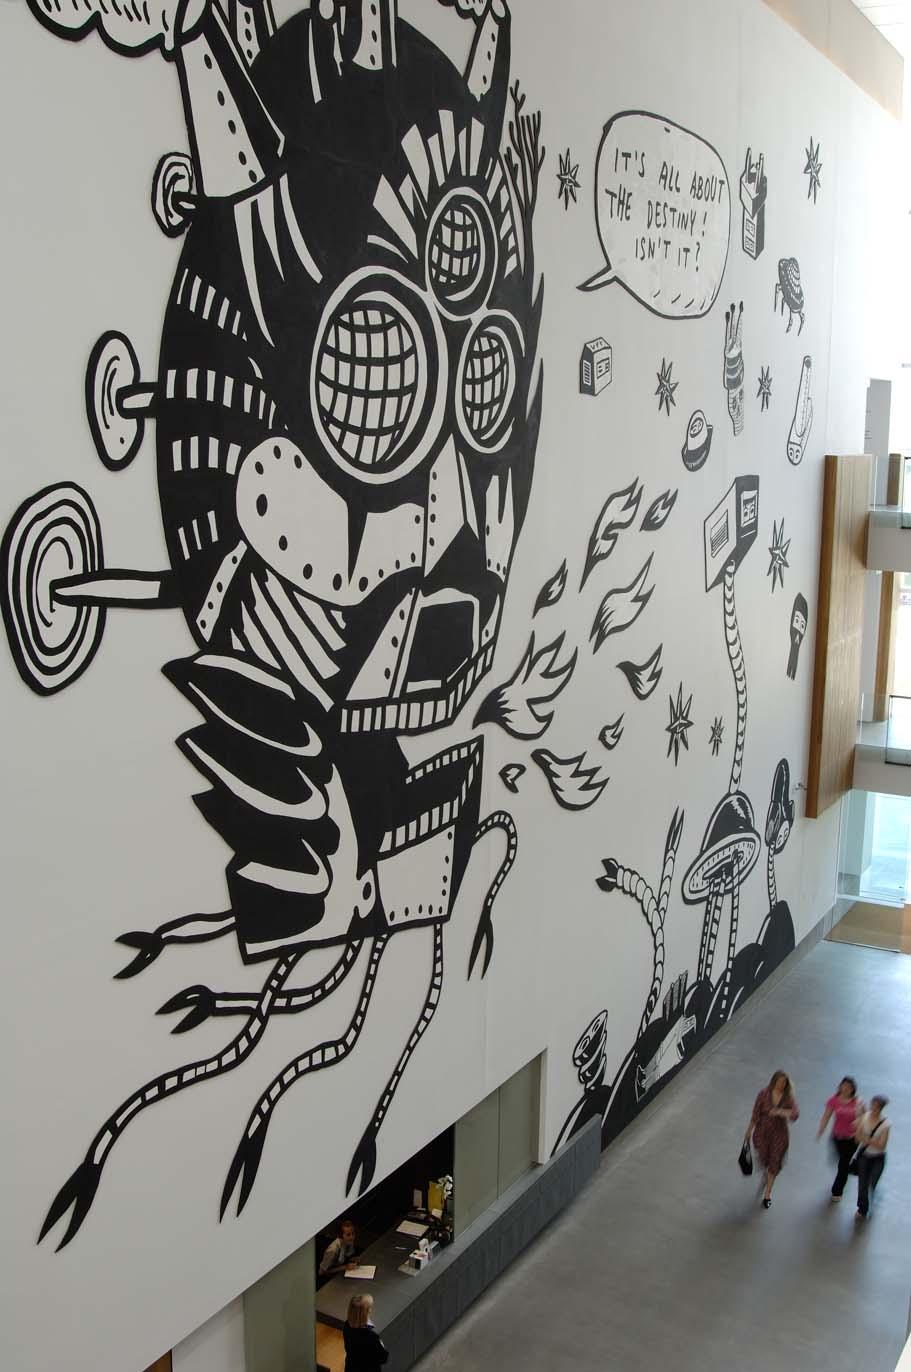 An installation view of an immense wall mural in GOMA's Long Gallery: a black-and-white painting of a fanciful robot breathing fire towers over visitors below.